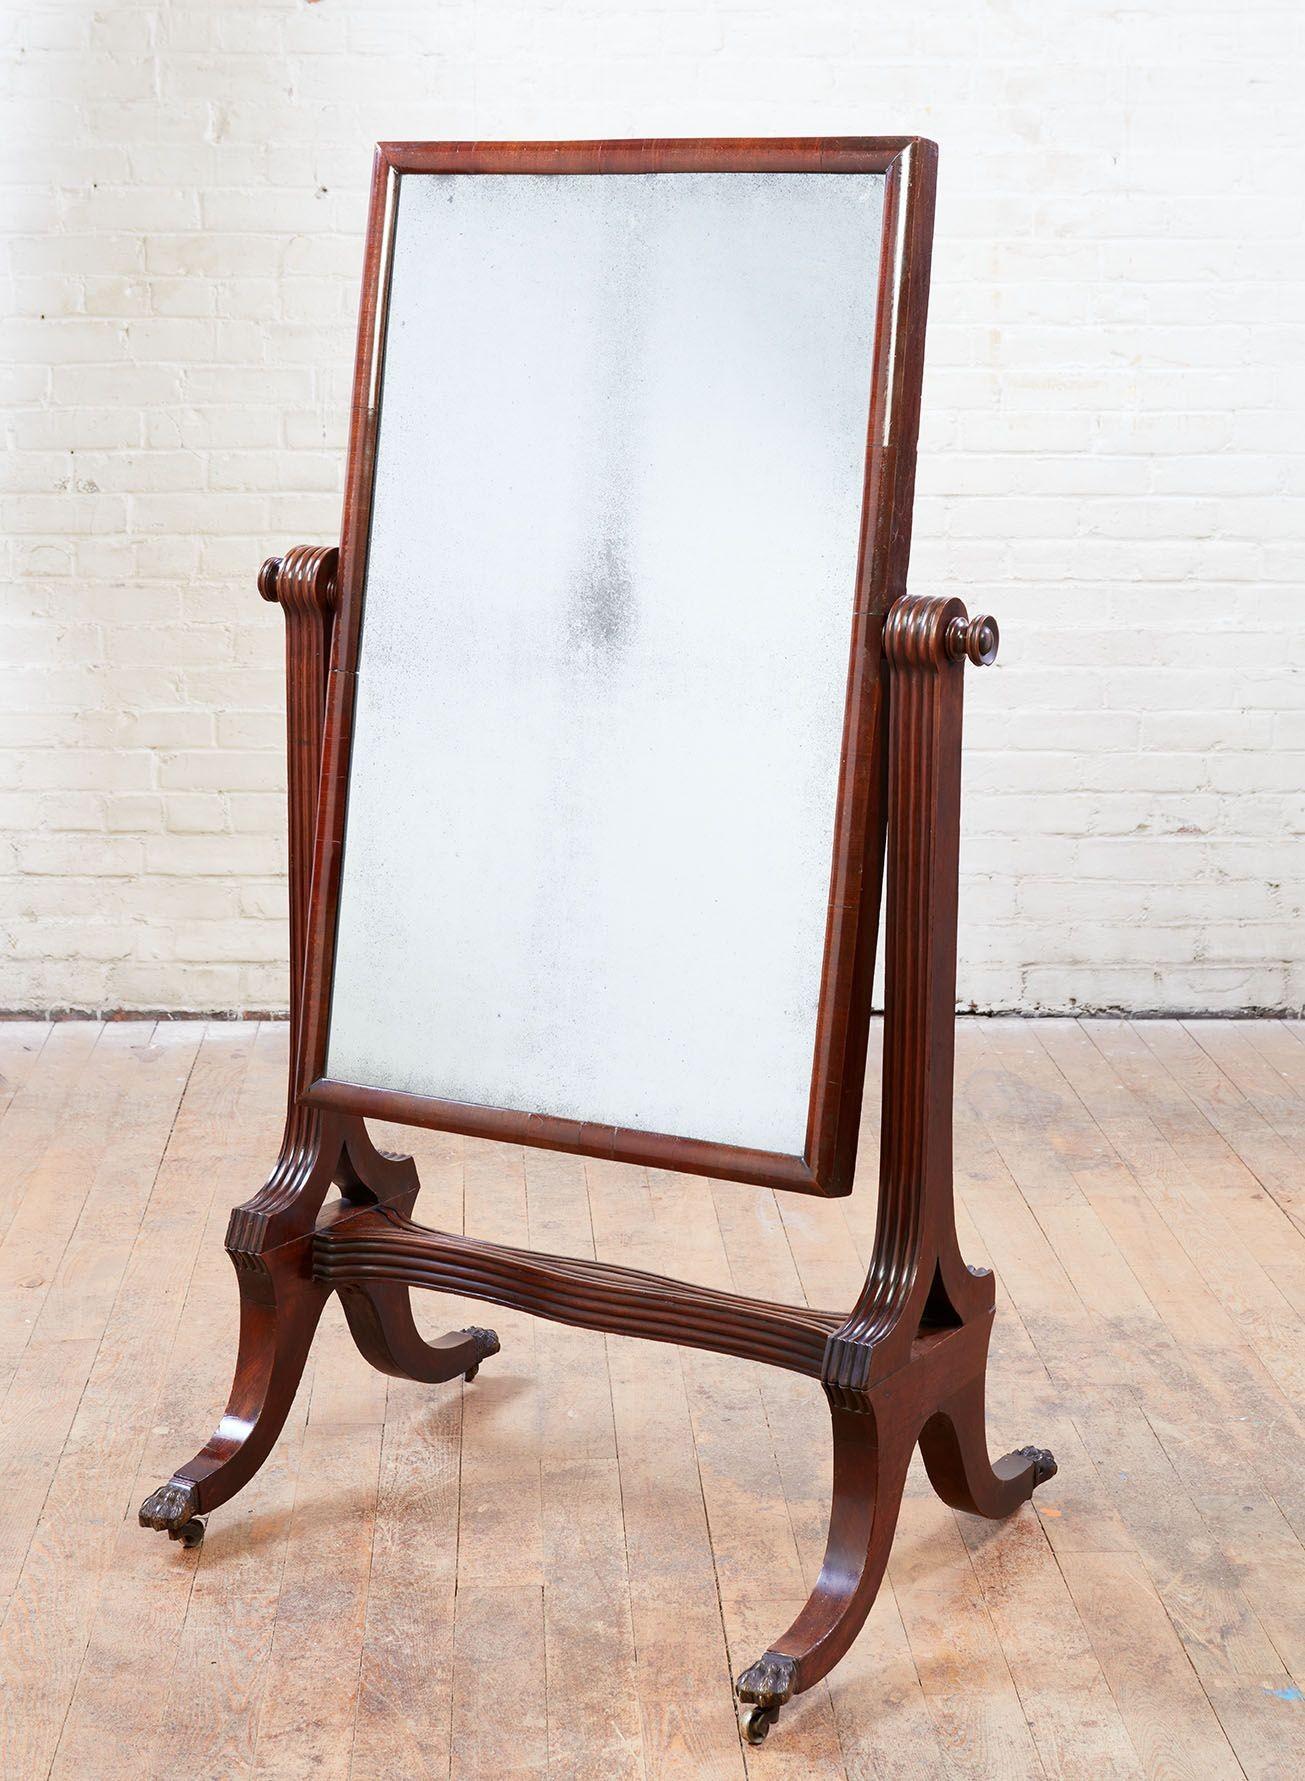 Fine English early 19th century mahogany cheval mirror, the original mercury glass plate with half round molded cross-grained frame, suspended from ribbed supports and standing on saber legs ending in paw feet, the whole possessing good rich color